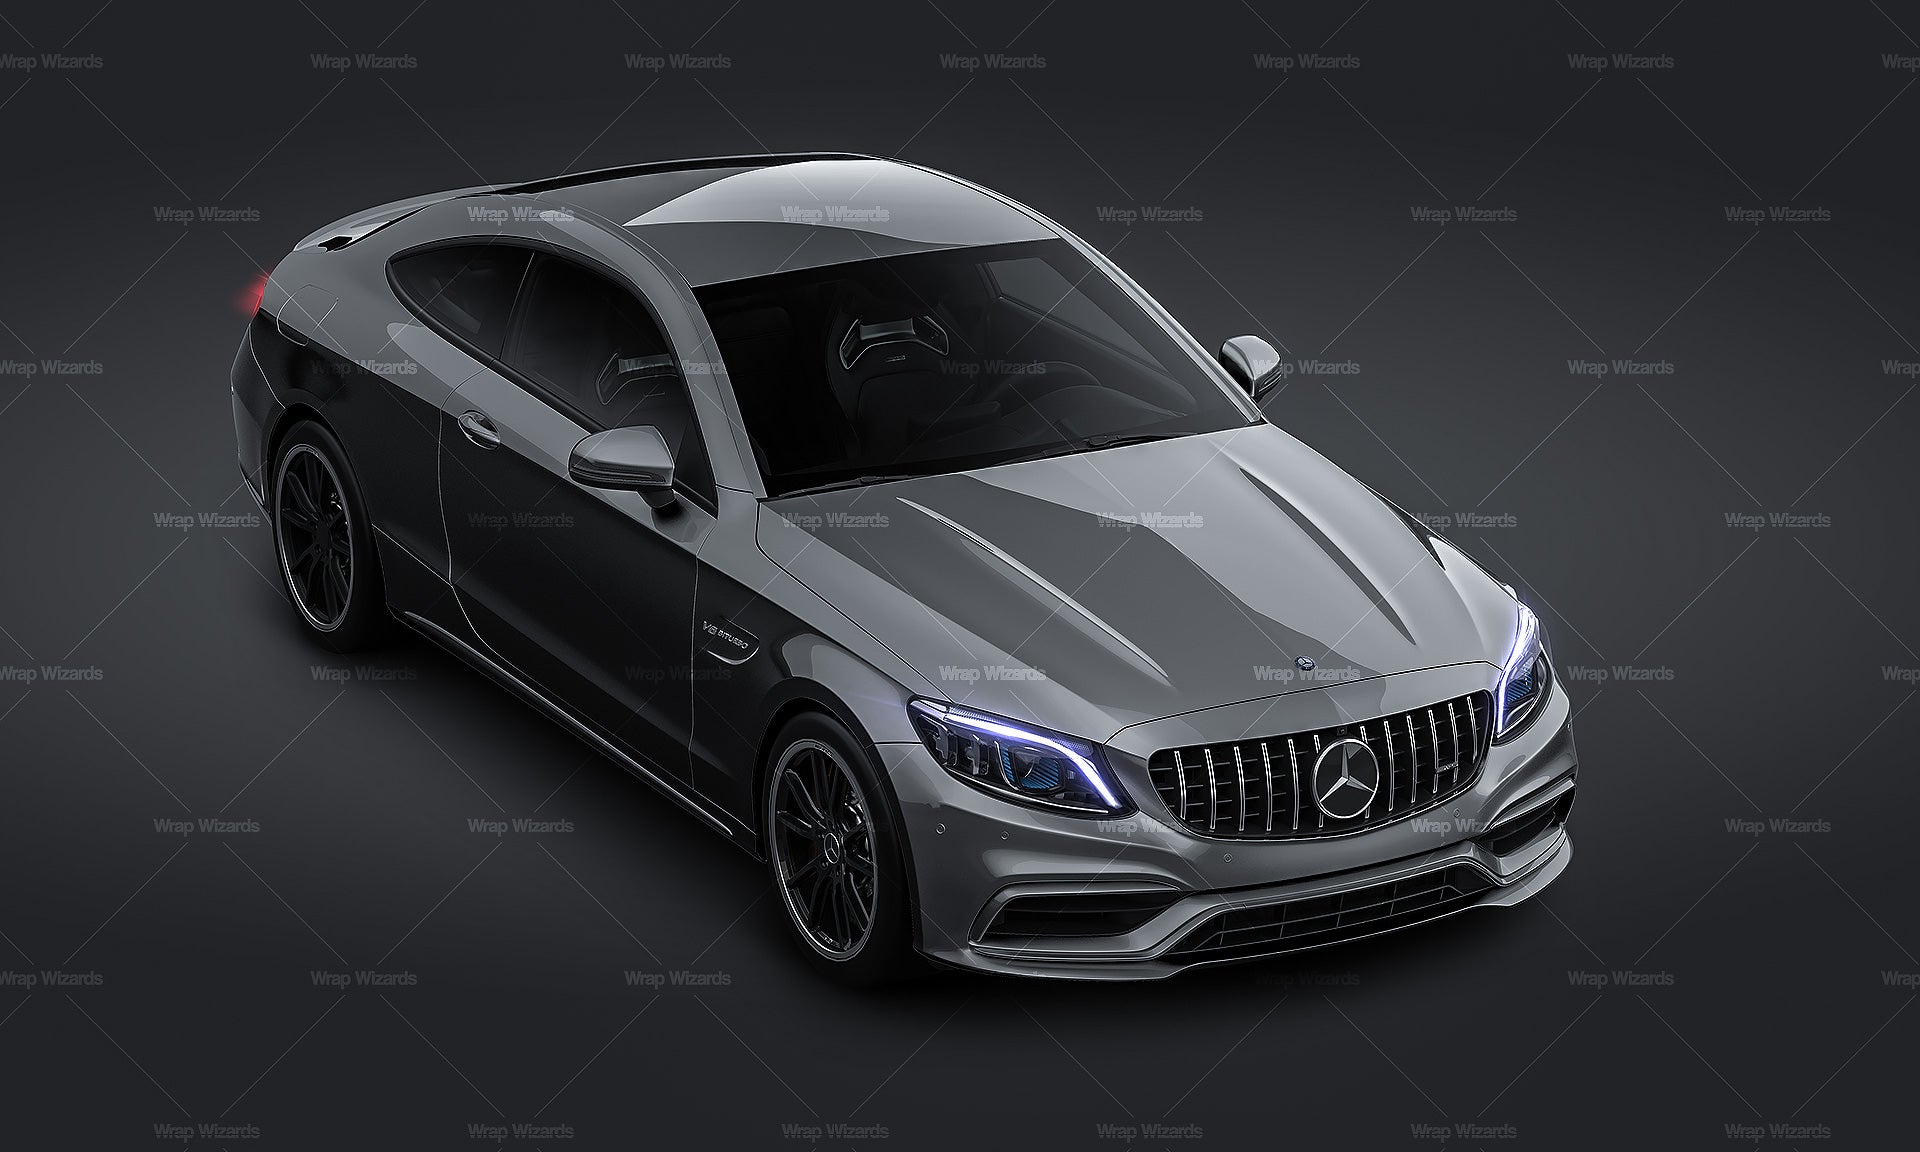 3/4 FRONT VIEW - Mercedes Benz C63S Coupe 2020 - Car Mockup